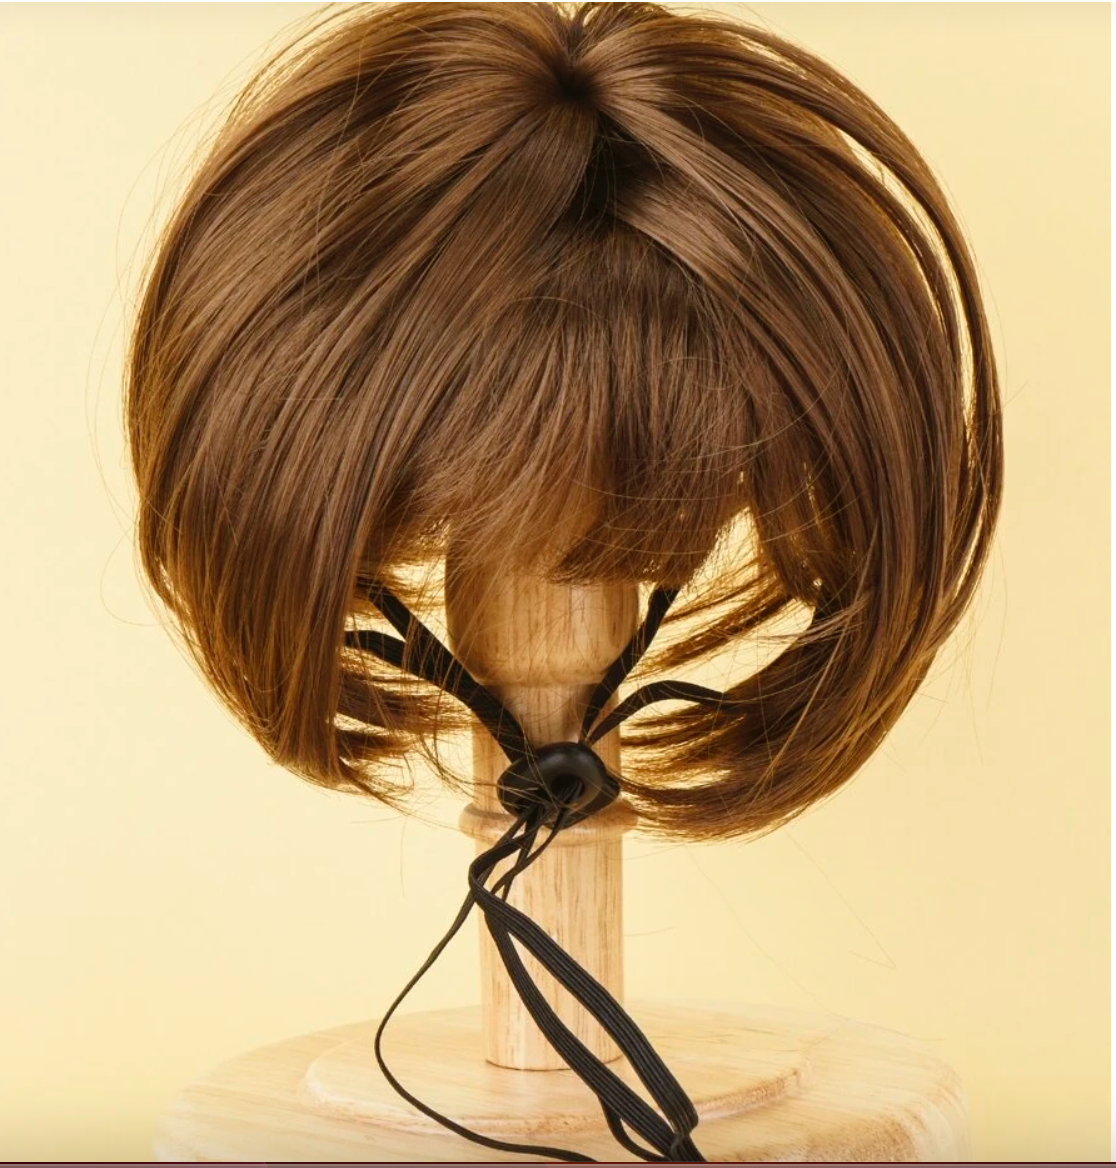 Anna Wintour Dress Up Pet Wig for Dogs and Cats